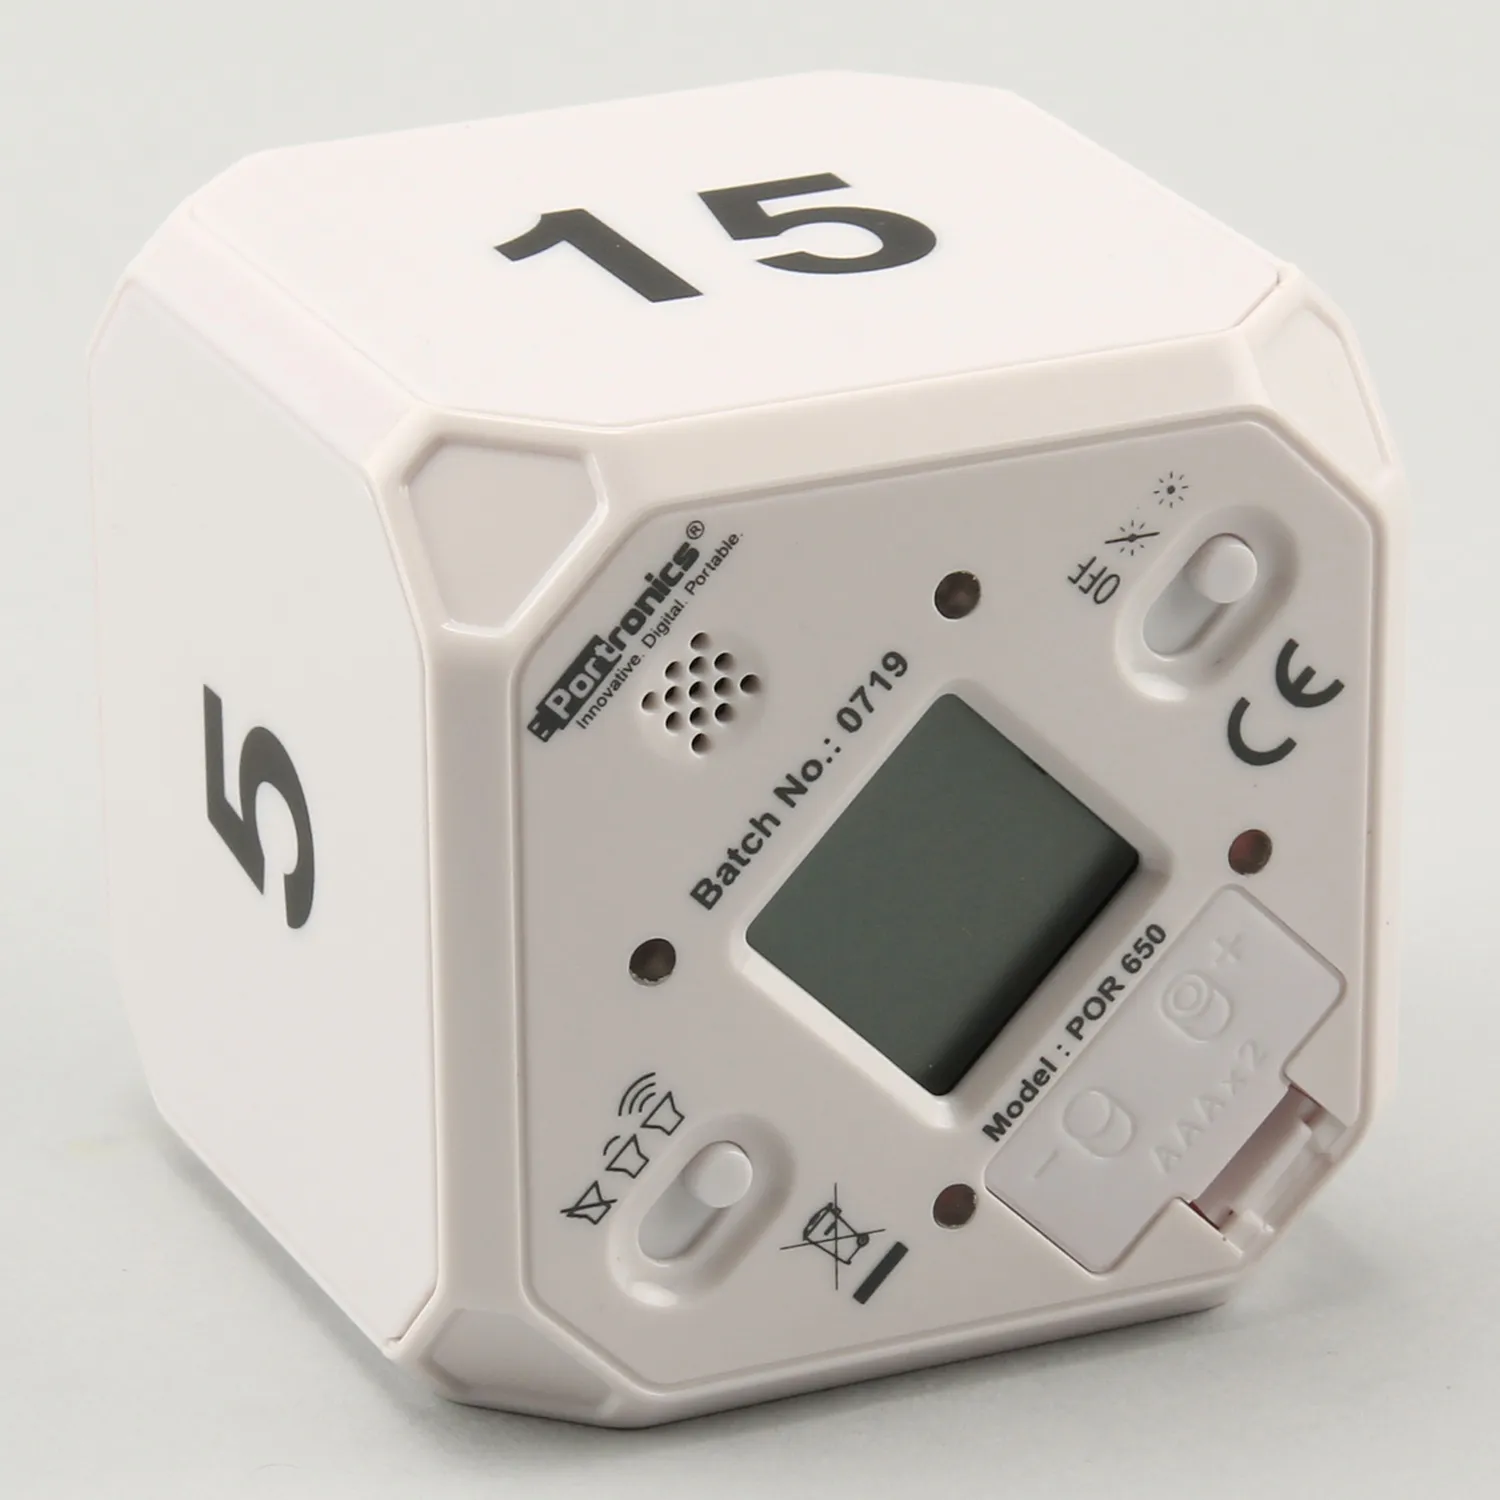 Portronics TimeOut Max-60-Countdown Timer Cube